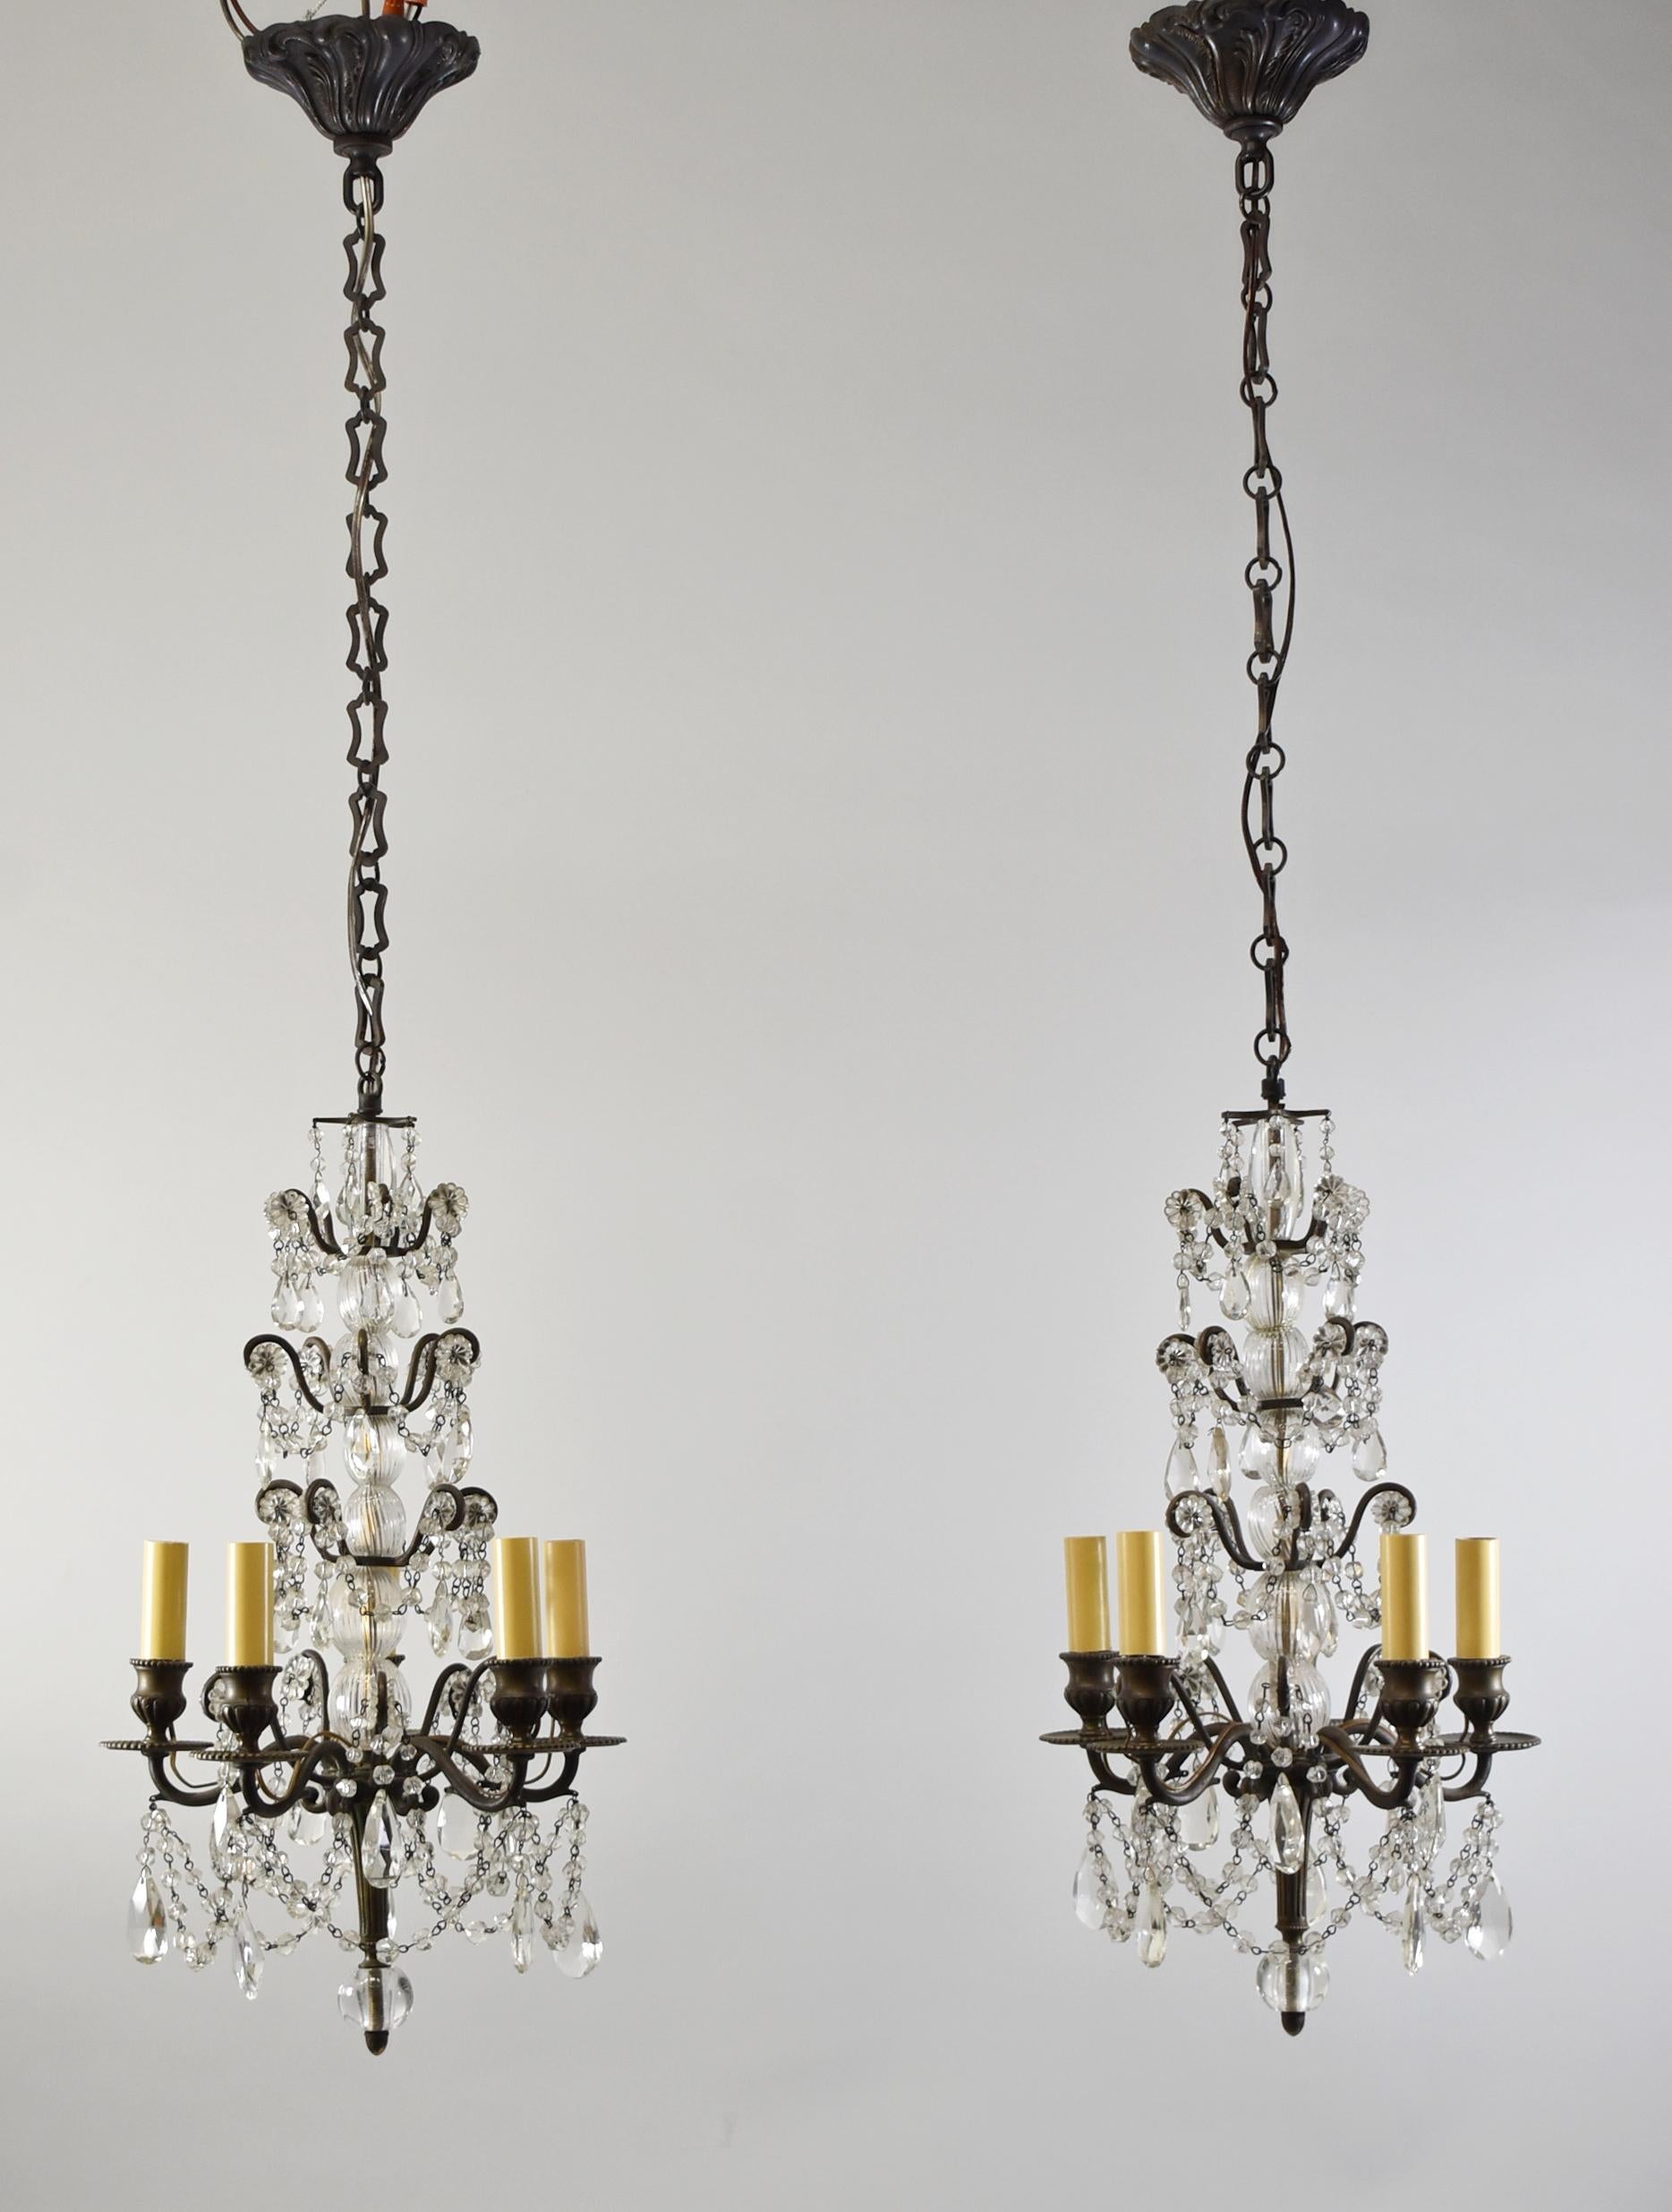 Pair antique four tier crystal, blown glass and brass chandeliers. Crystal draped beads with cut floral details. Five candelabra sockets. Center blown and turned glass center stem. Very nice condition. Body measures 19